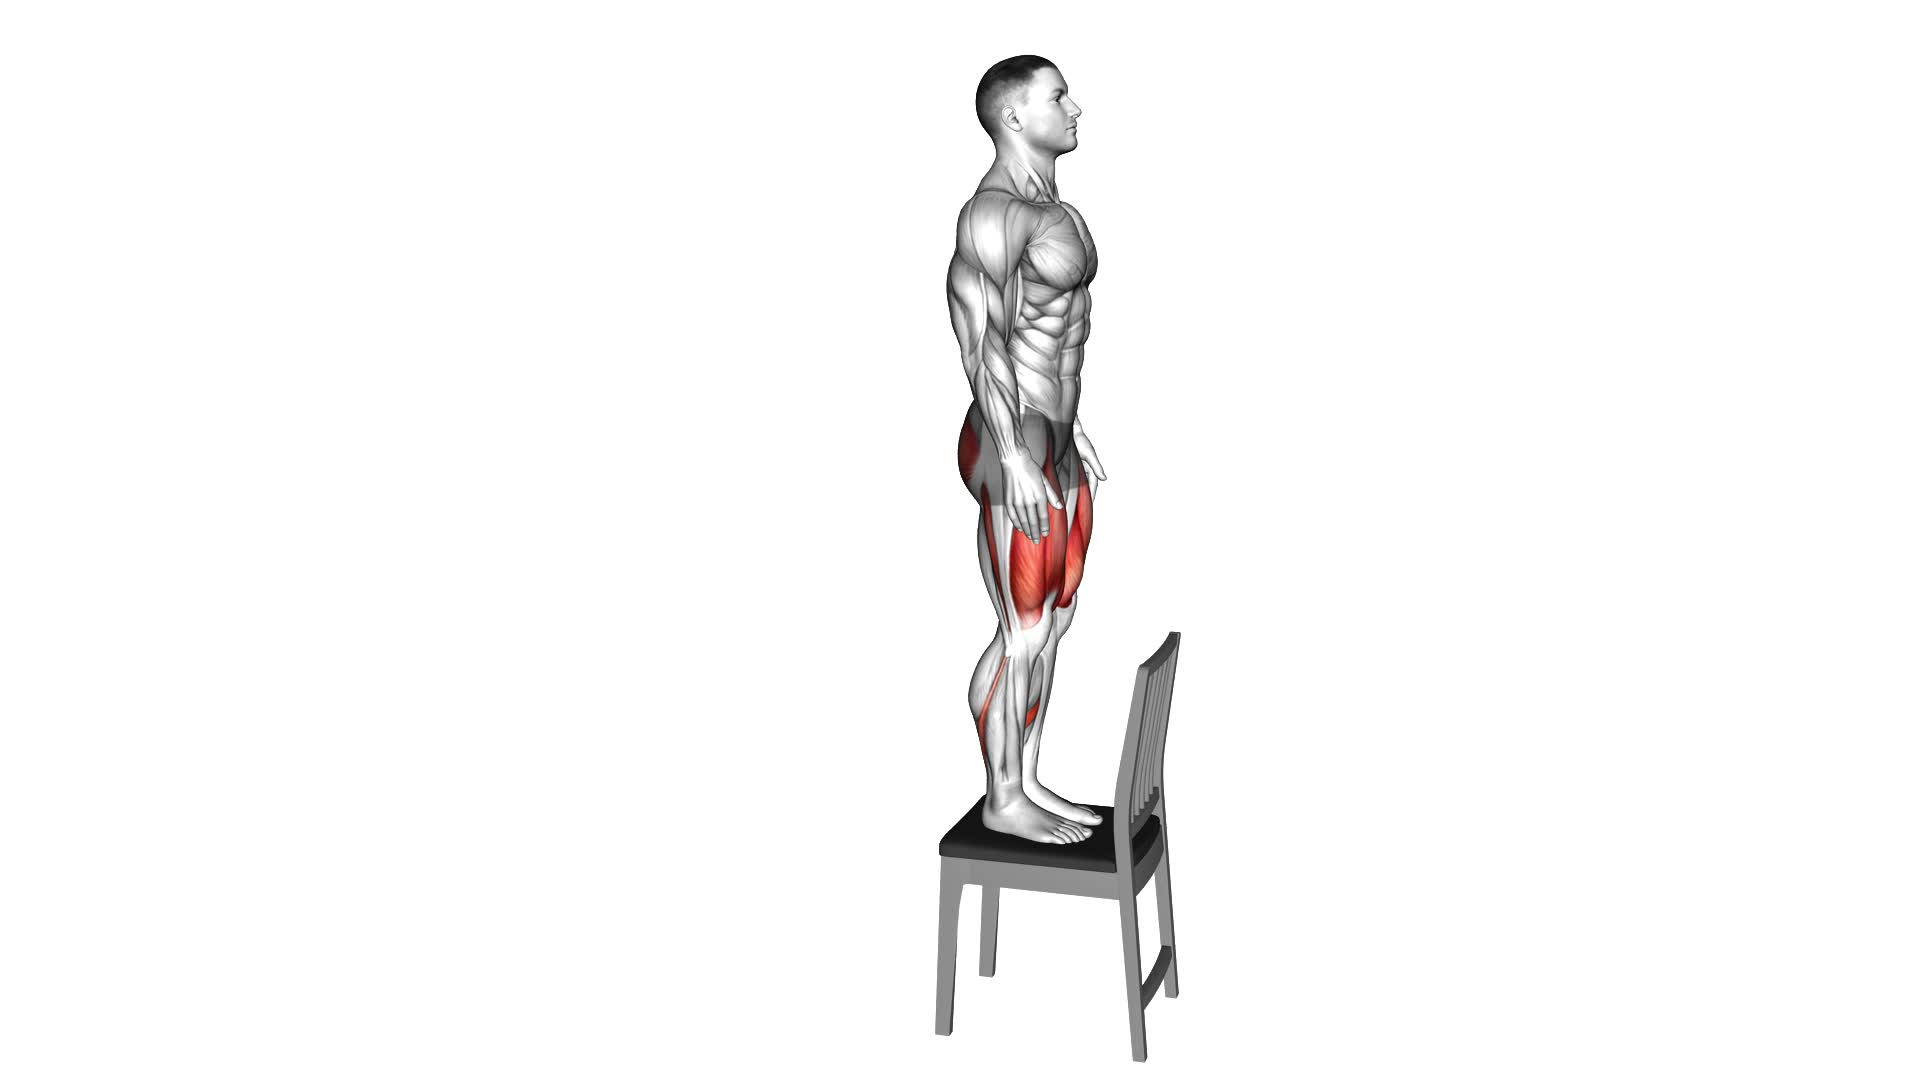 Step up on Chair - Video Exercise Guide & Tips